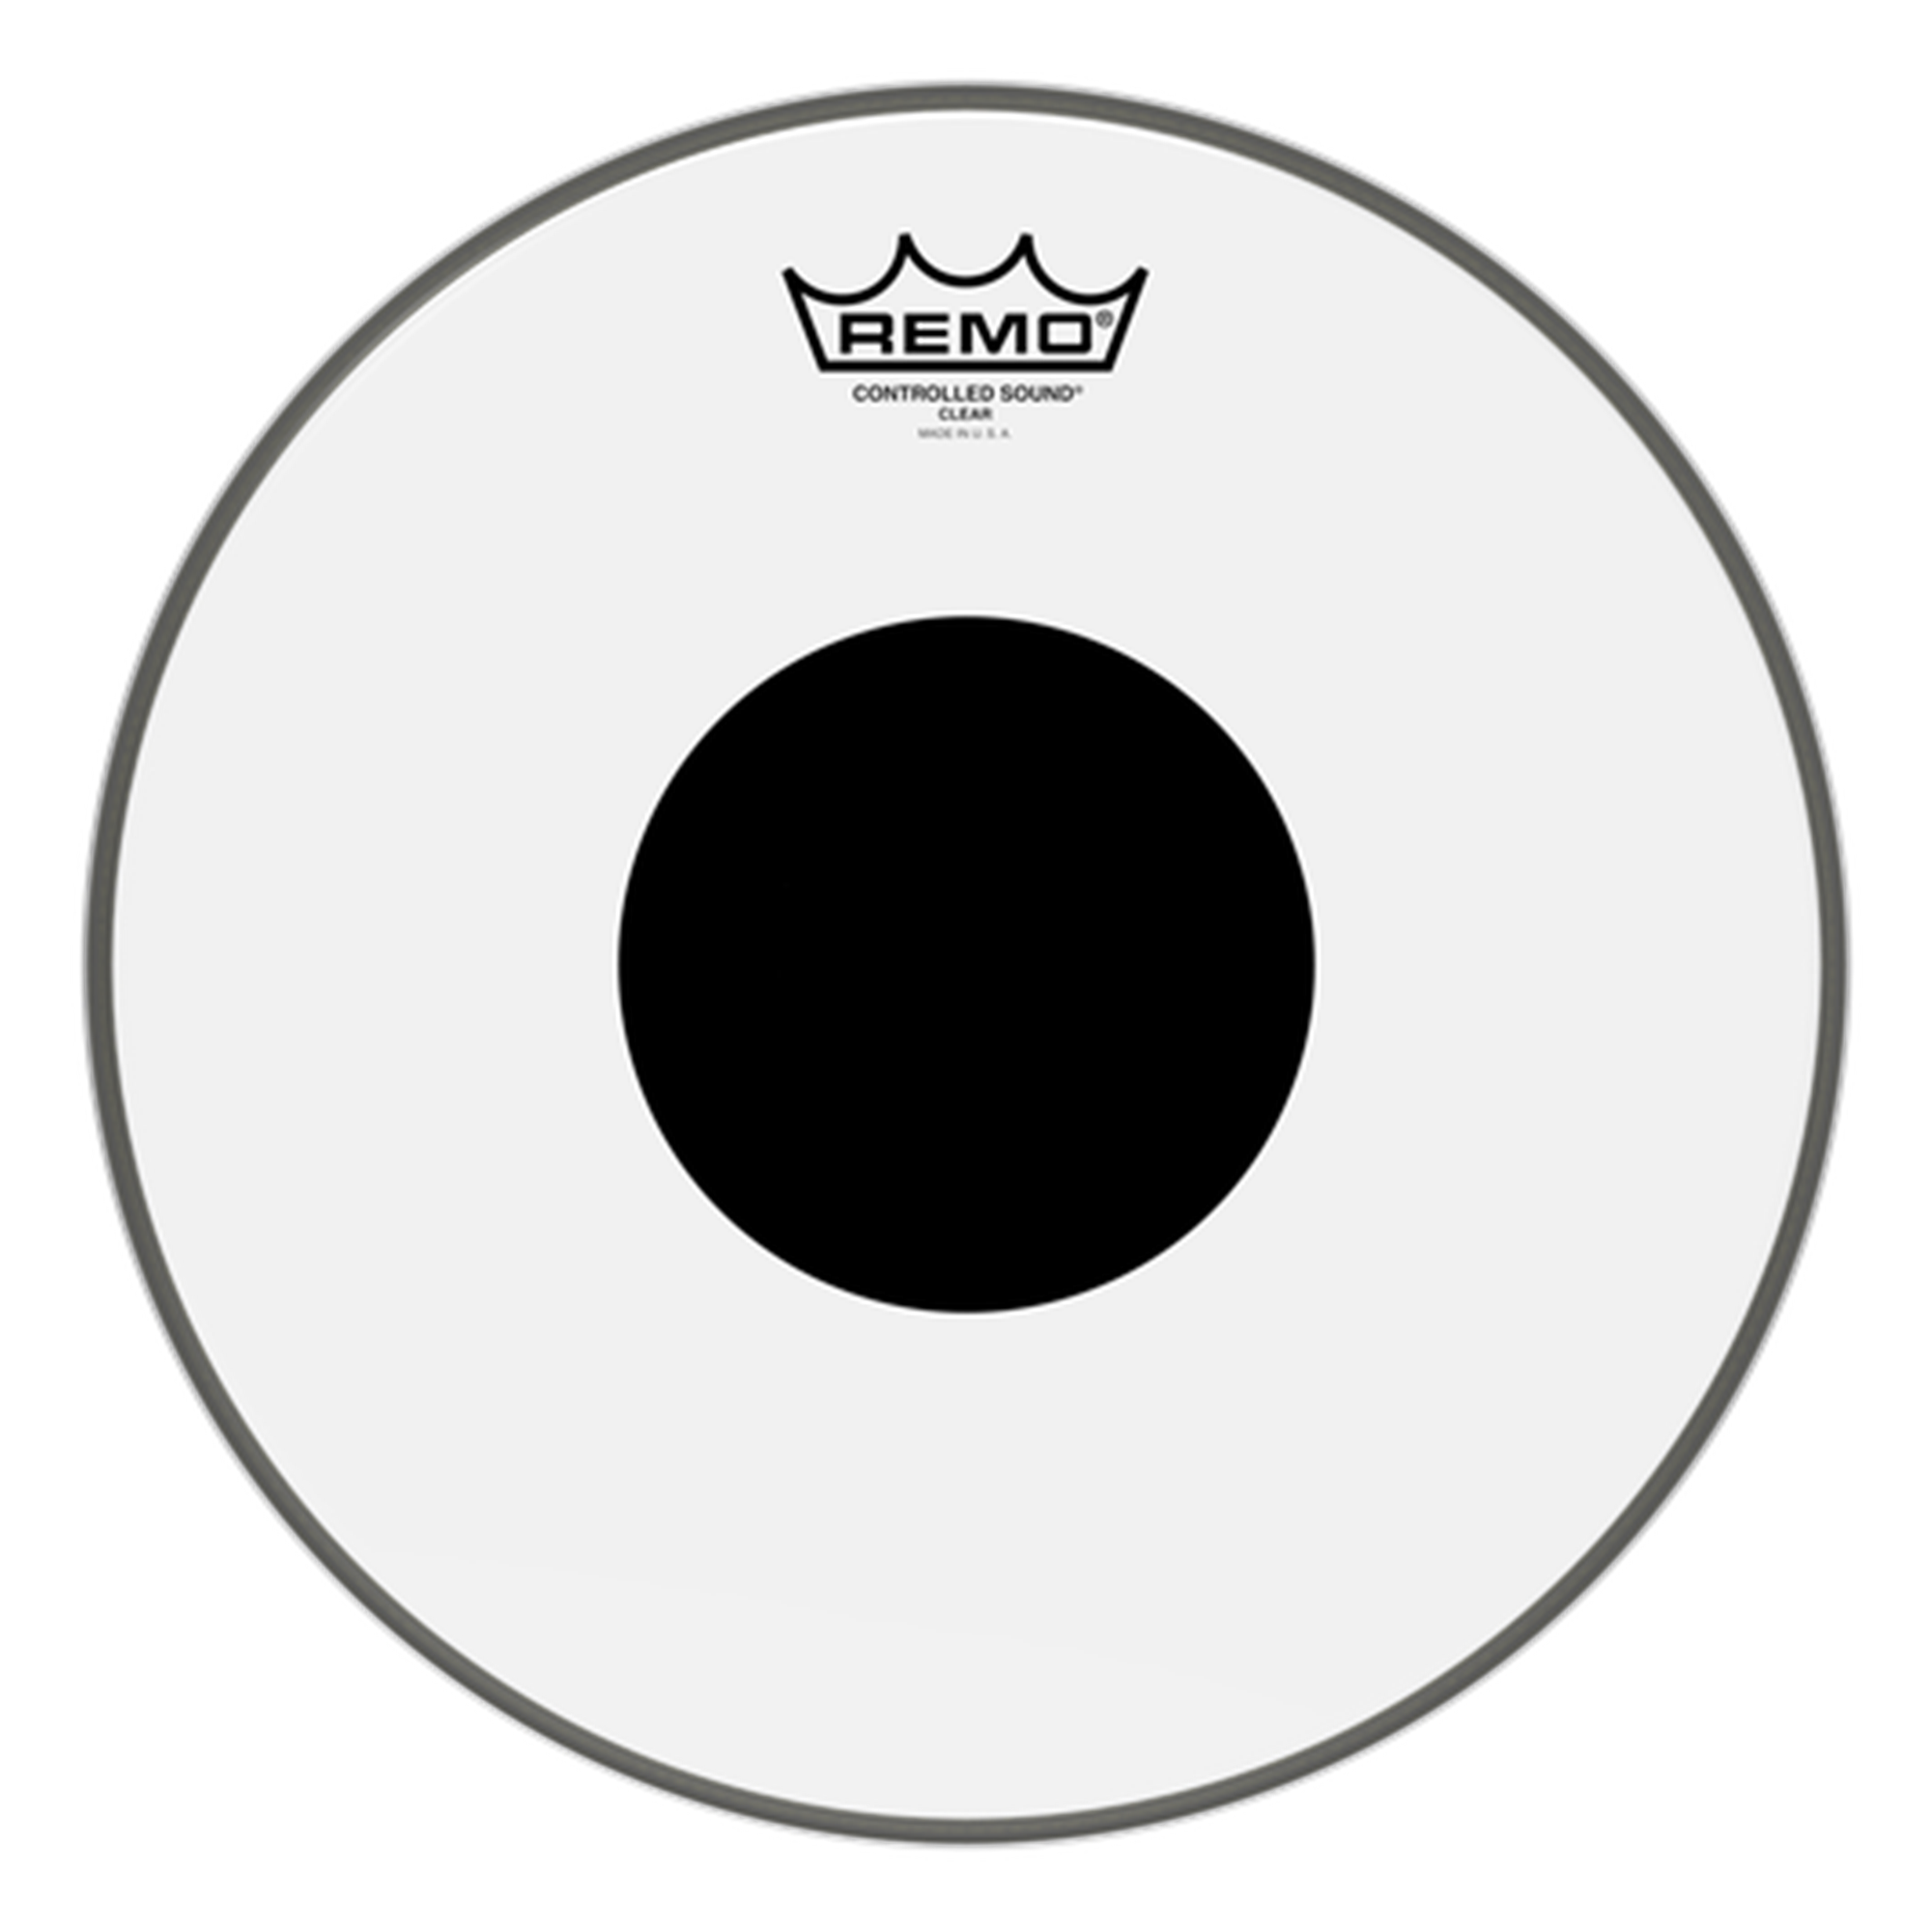 REMO CS-0312-10 12" Clear Controlled Sound Drum Head (Black Dot On Top)